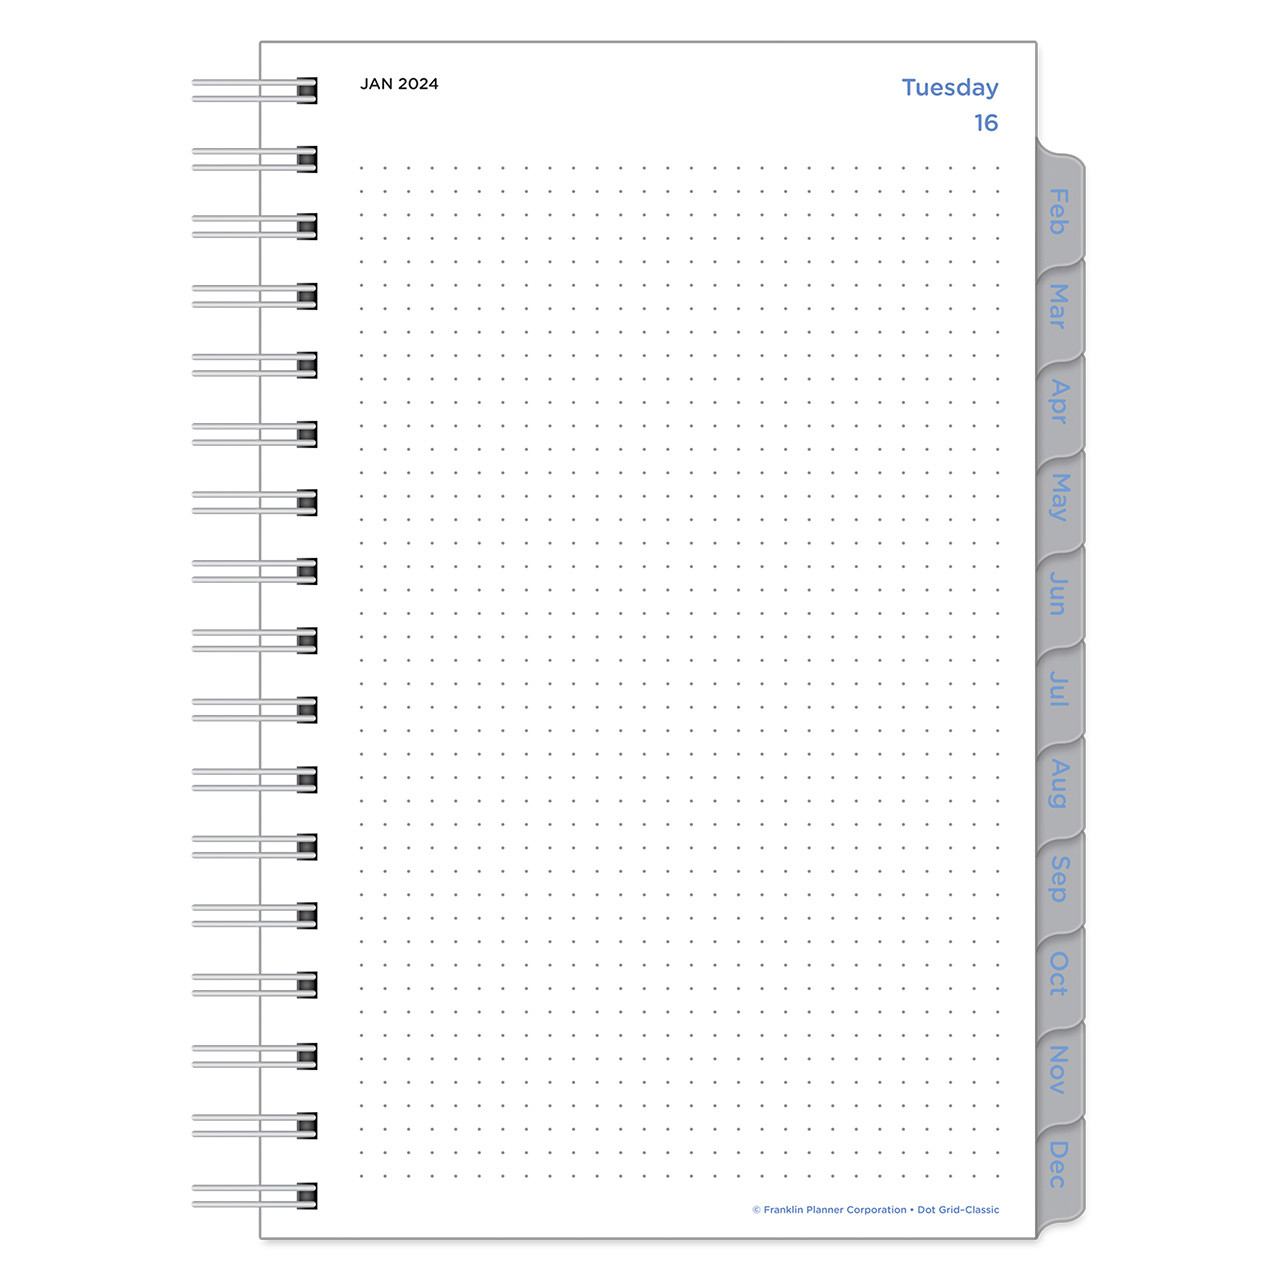 Dot Grid Planning 101: 5 Quick Tips to Get You Started